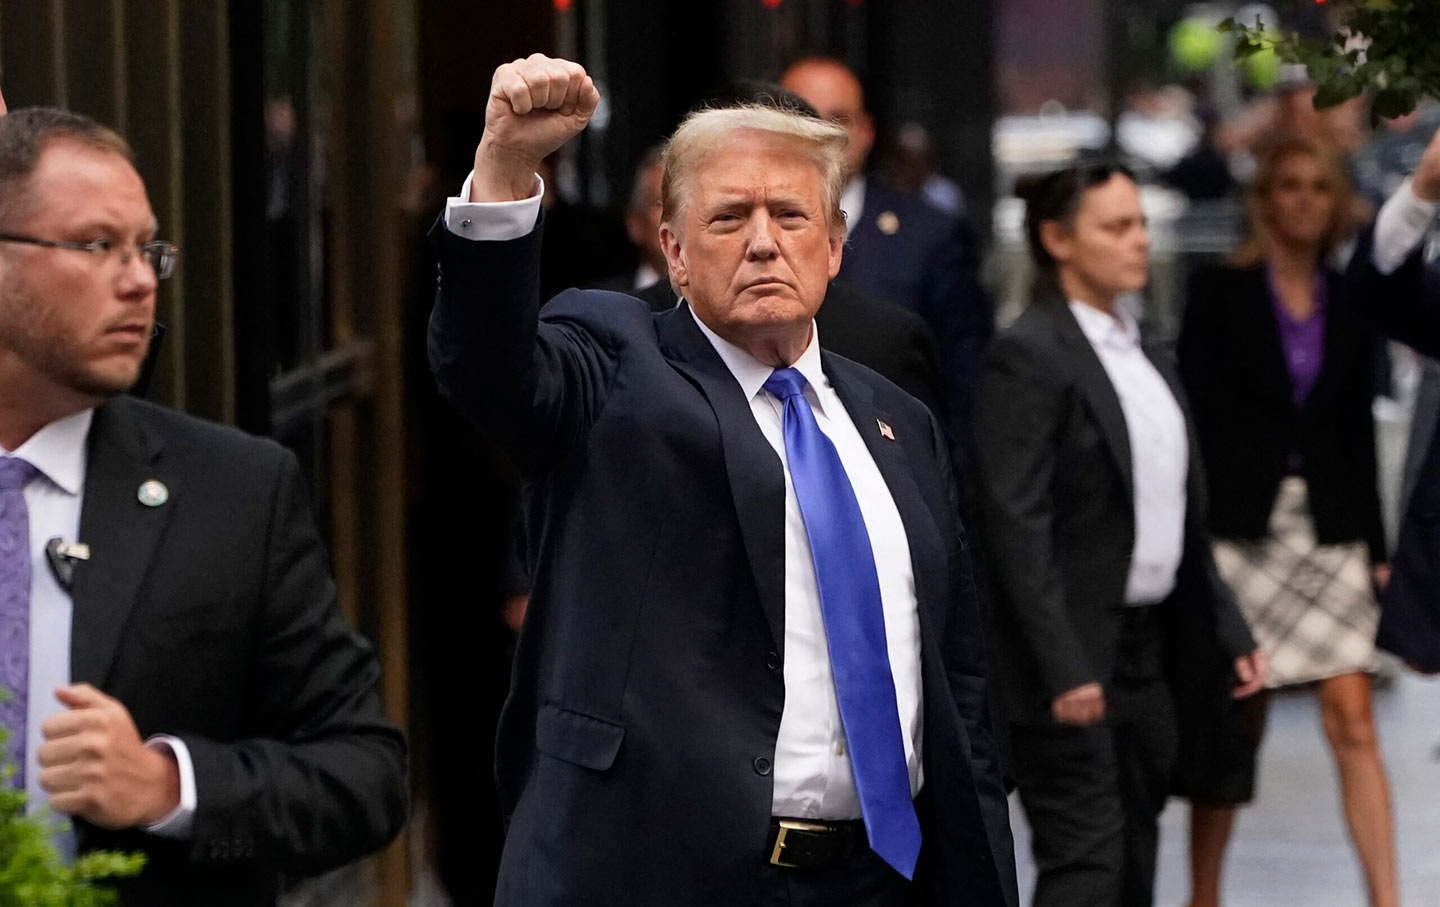 Donald Trump holds up a fist outside the Trump Building after his conviction.